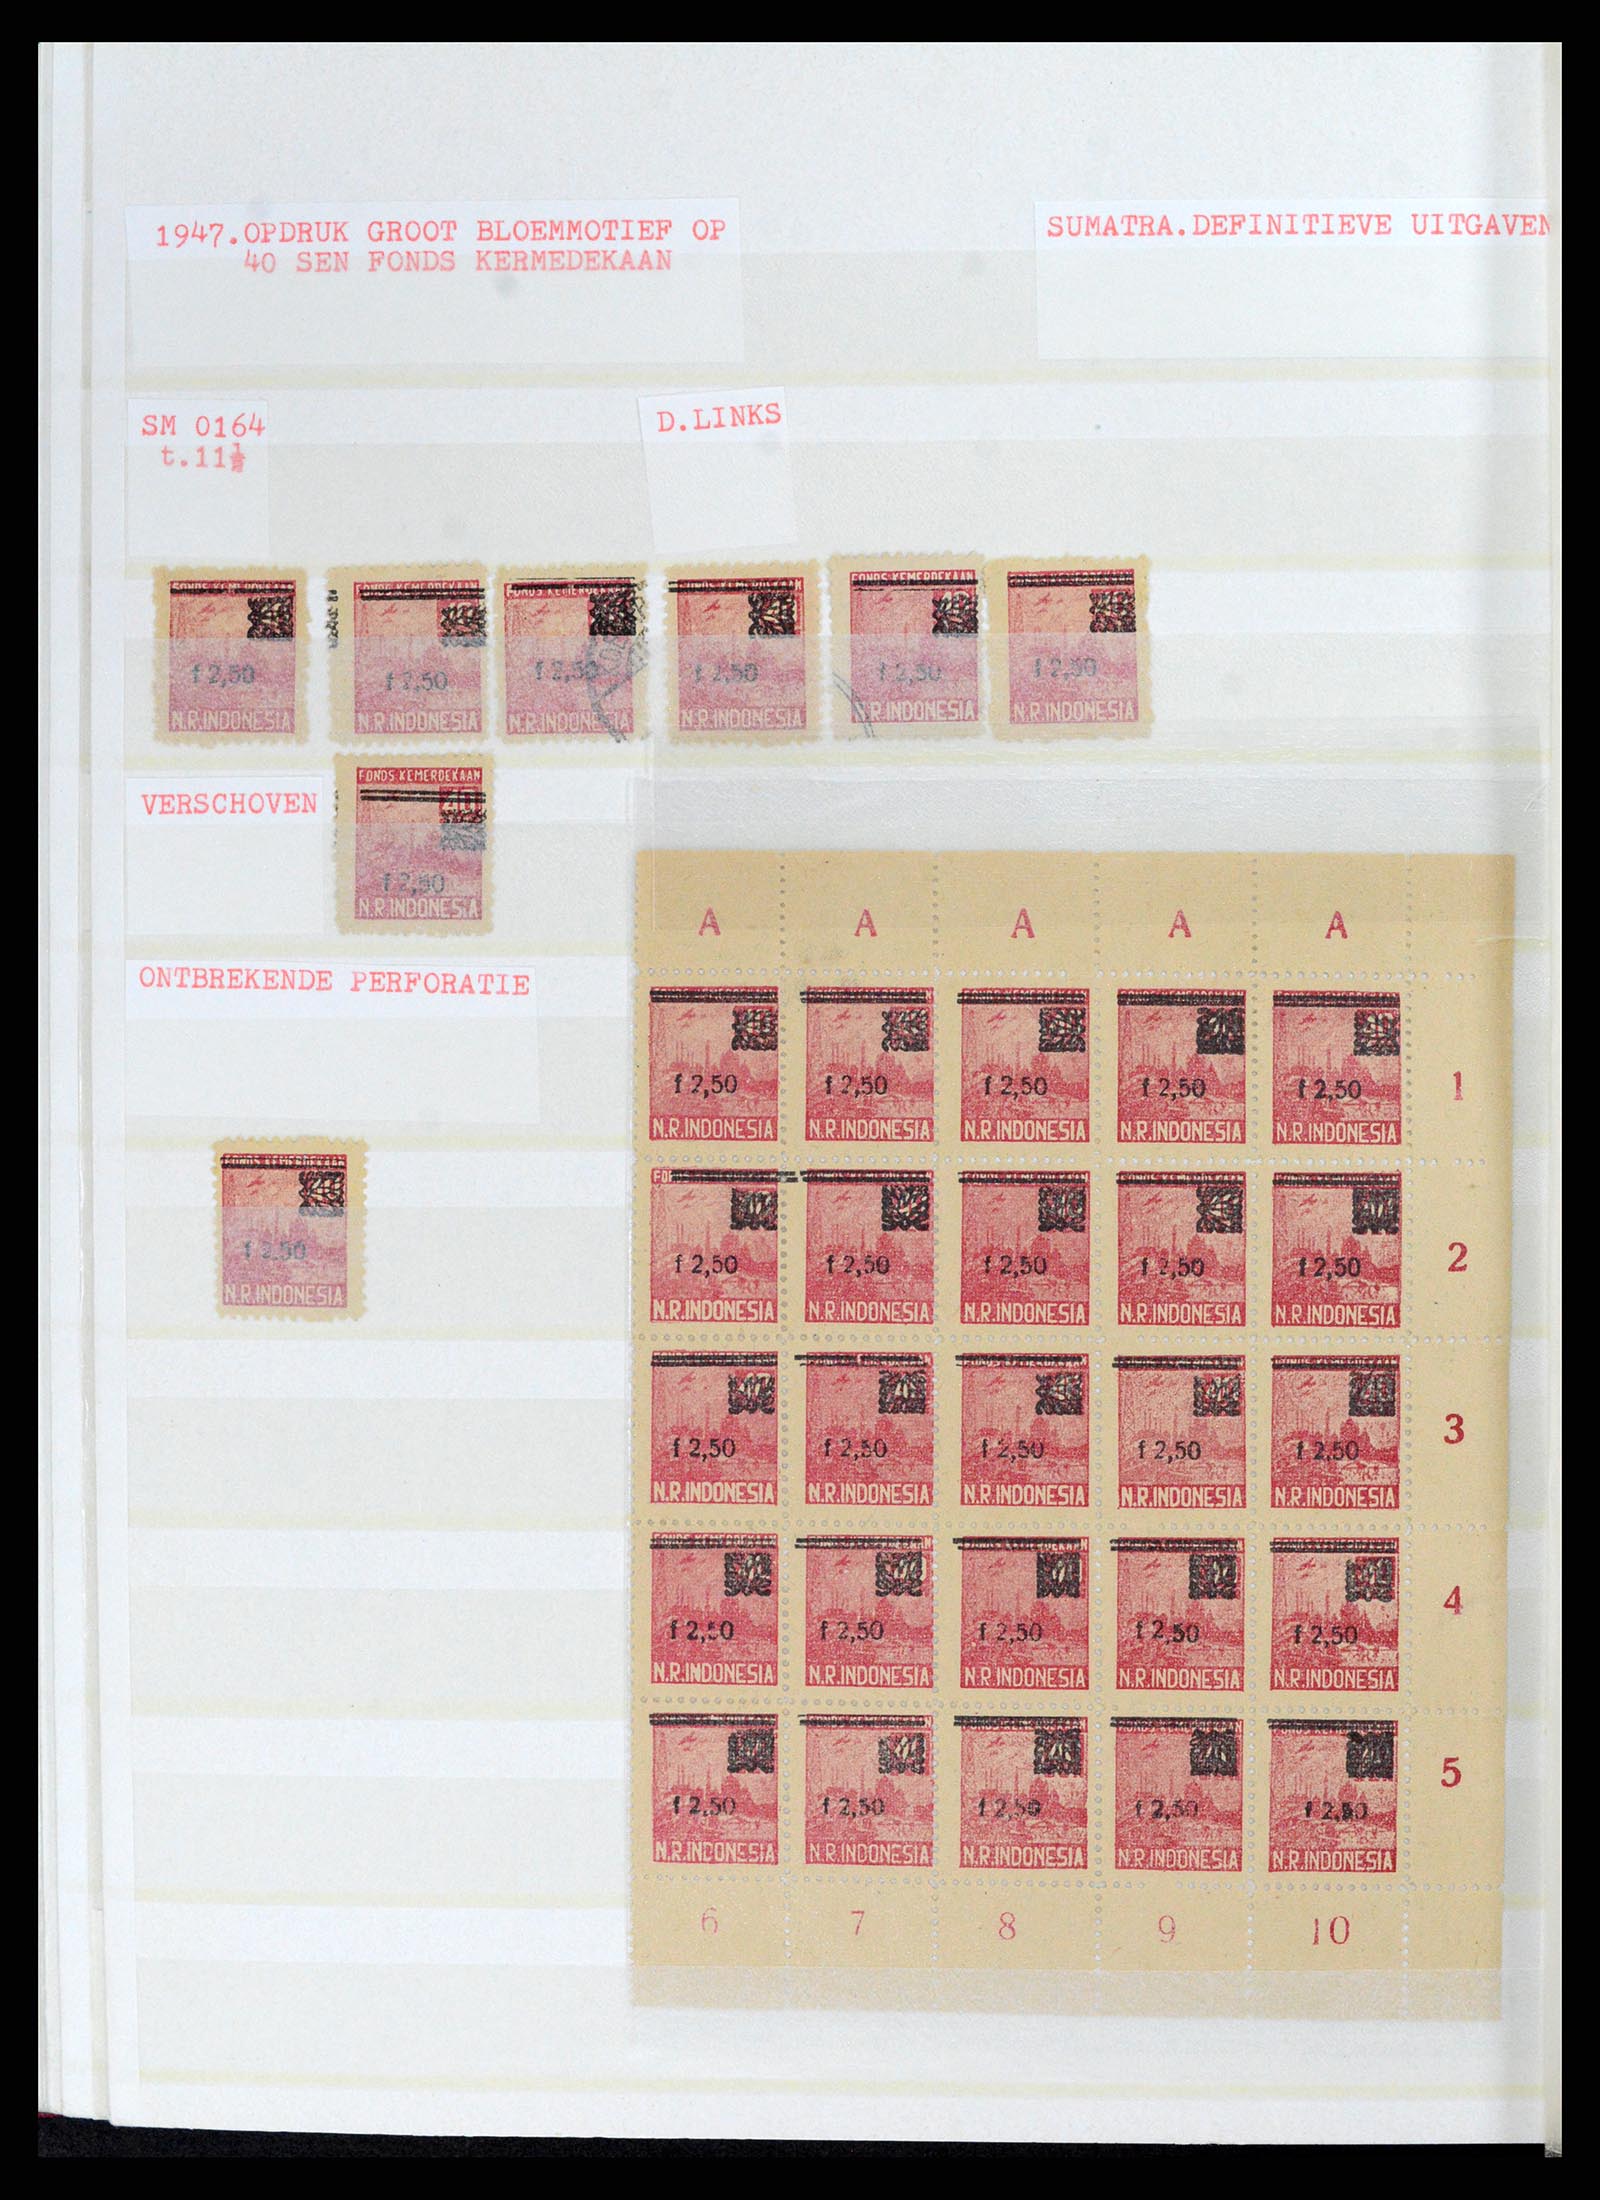 37692 161 - Stamp collection 37692 Indonesia interimperiod 1945-1499.